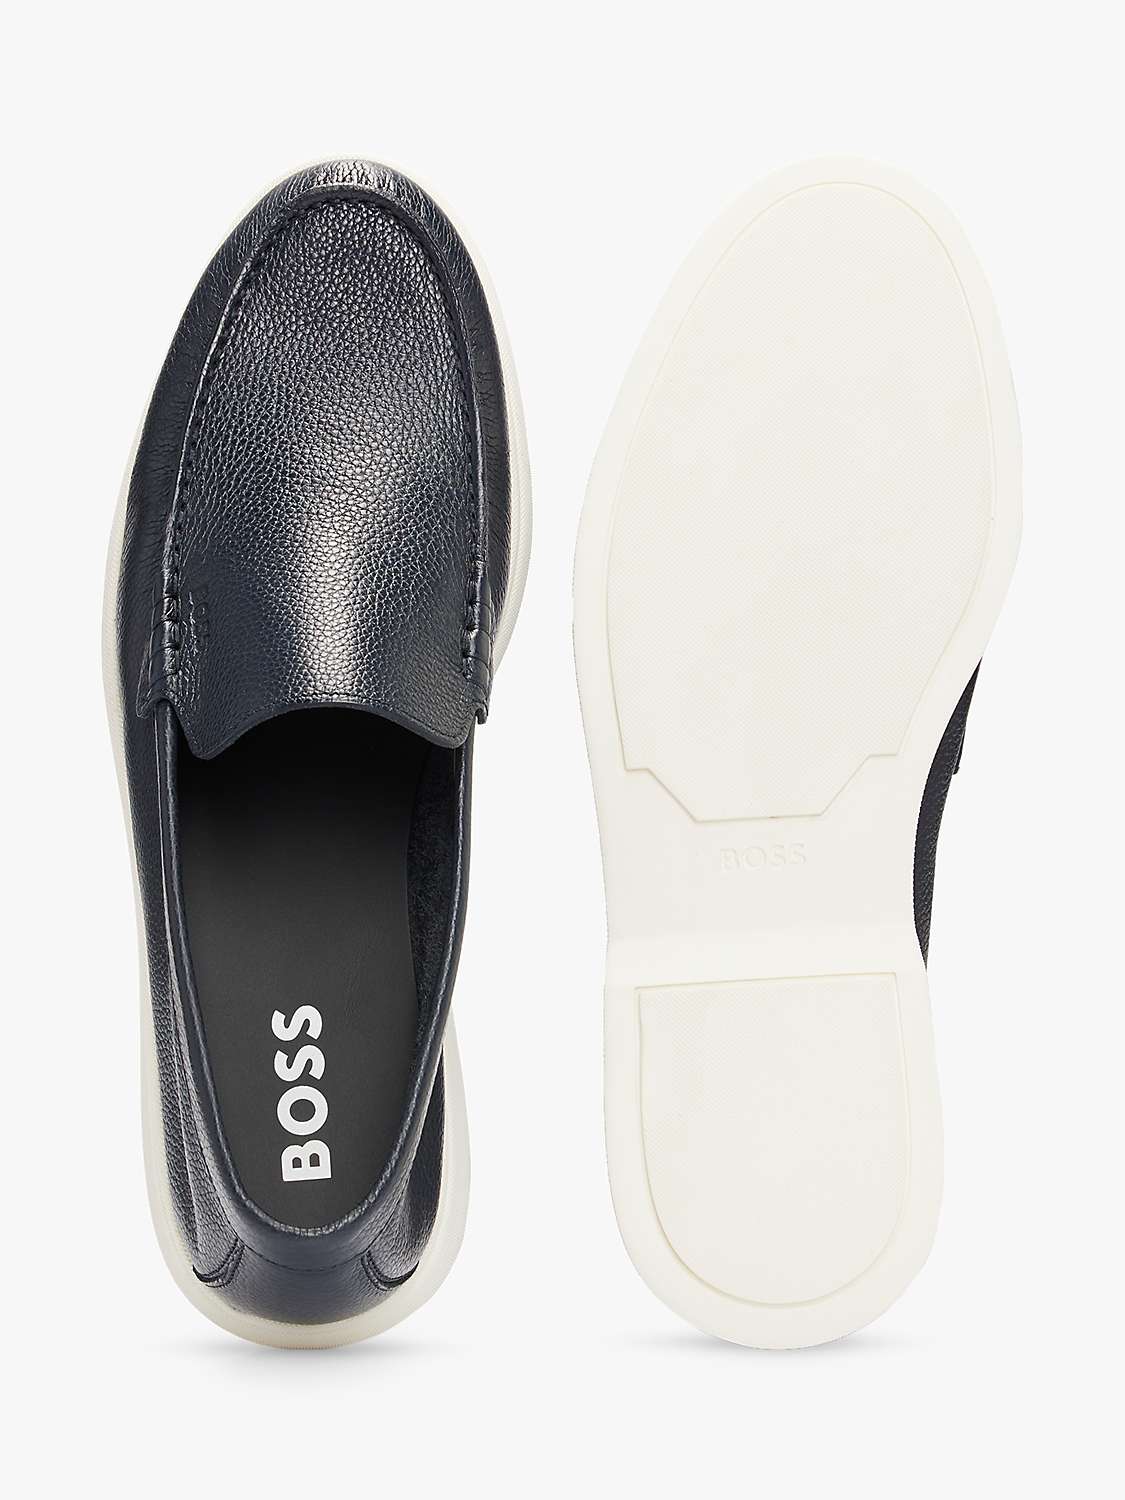 Buy BOSS Sienne Leather Moccasin Loafers Online at johnlewis.com